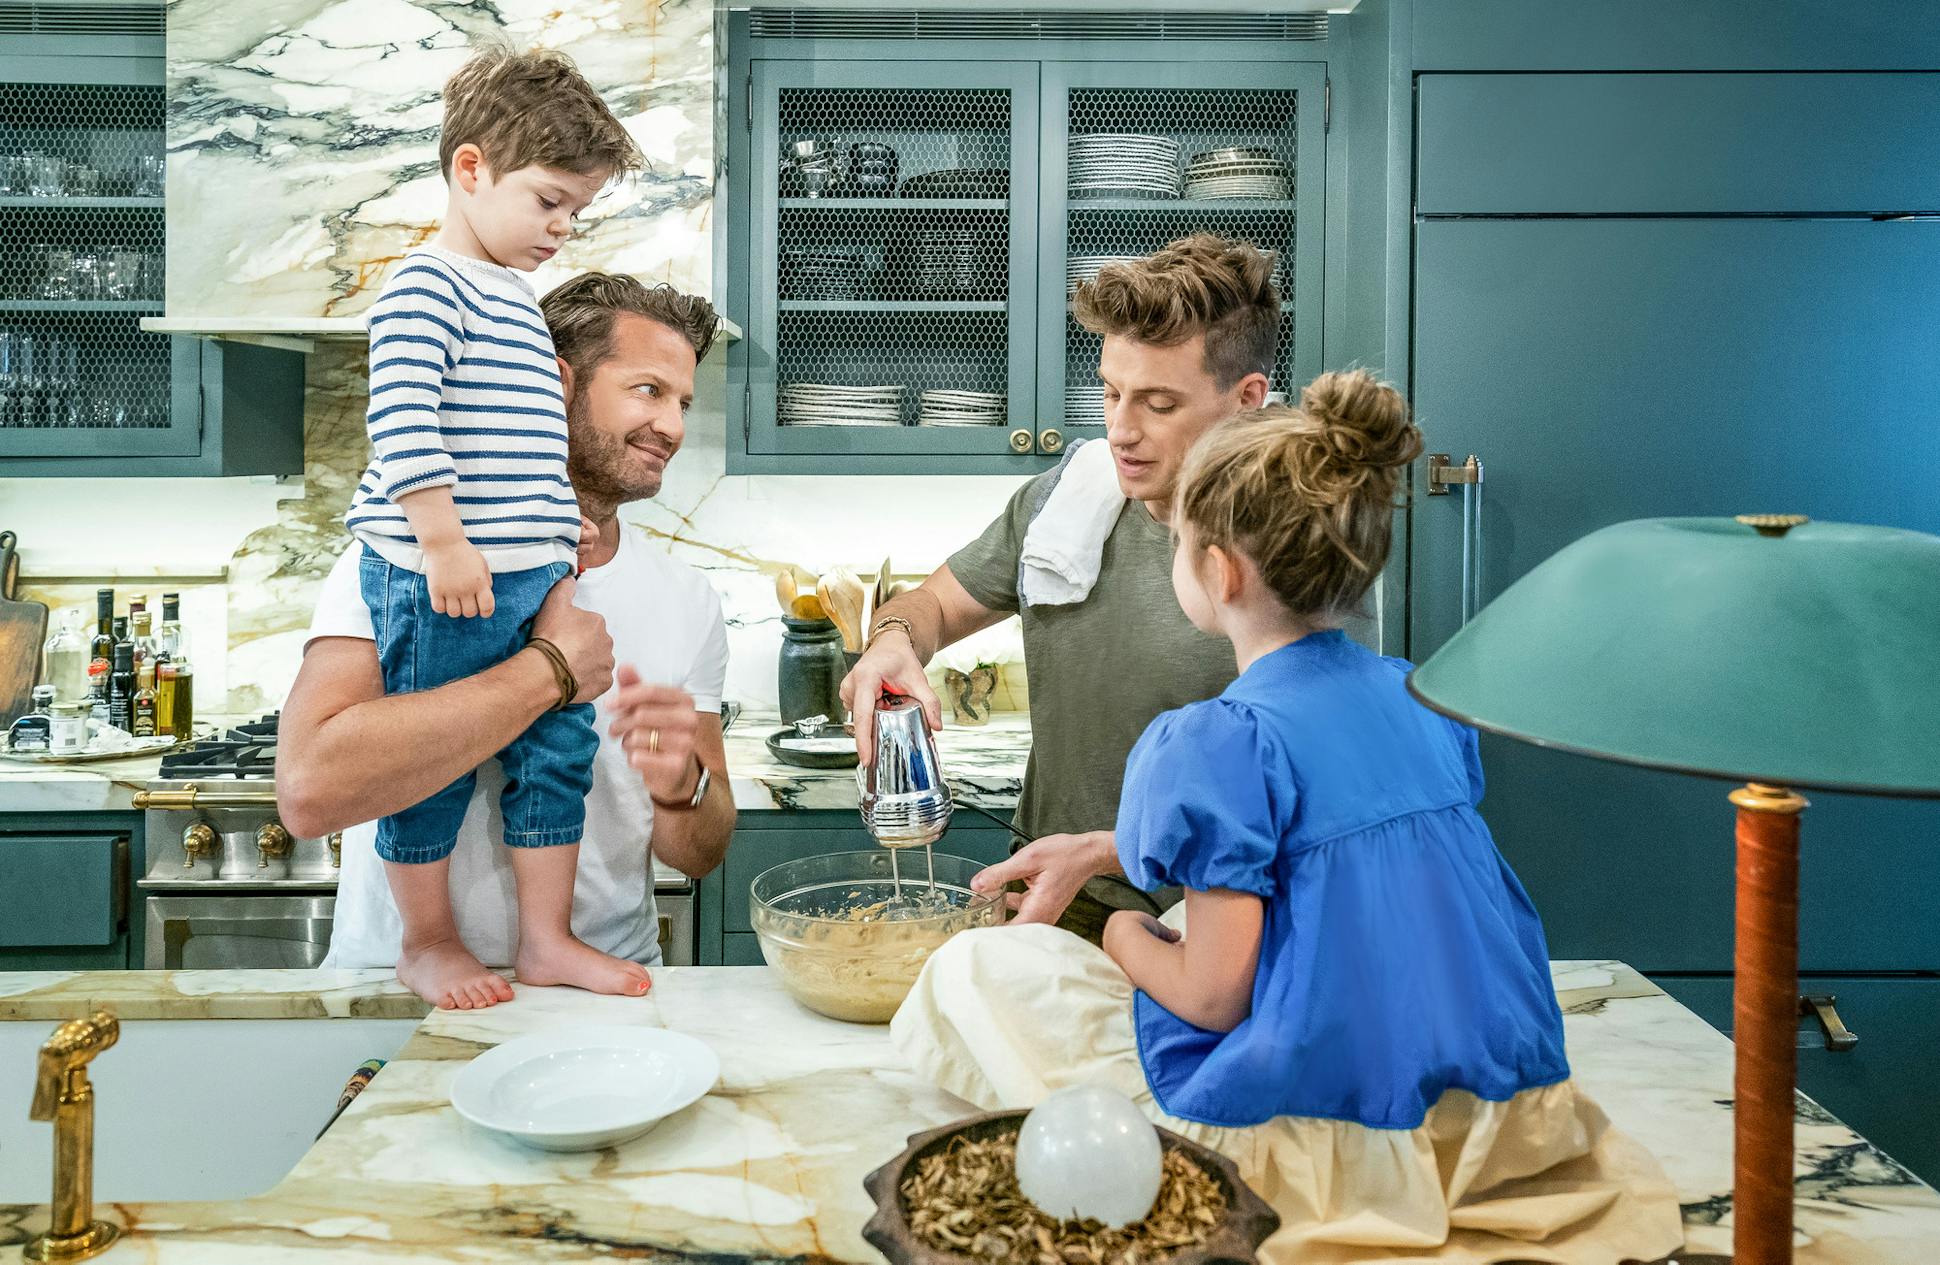 HGTV viewers have a window into the lives of designers and television personalities Nate Berkus, left, and Jeremiah Brent, who often are seen on camera with their children, Oskar Michael and Poppy.